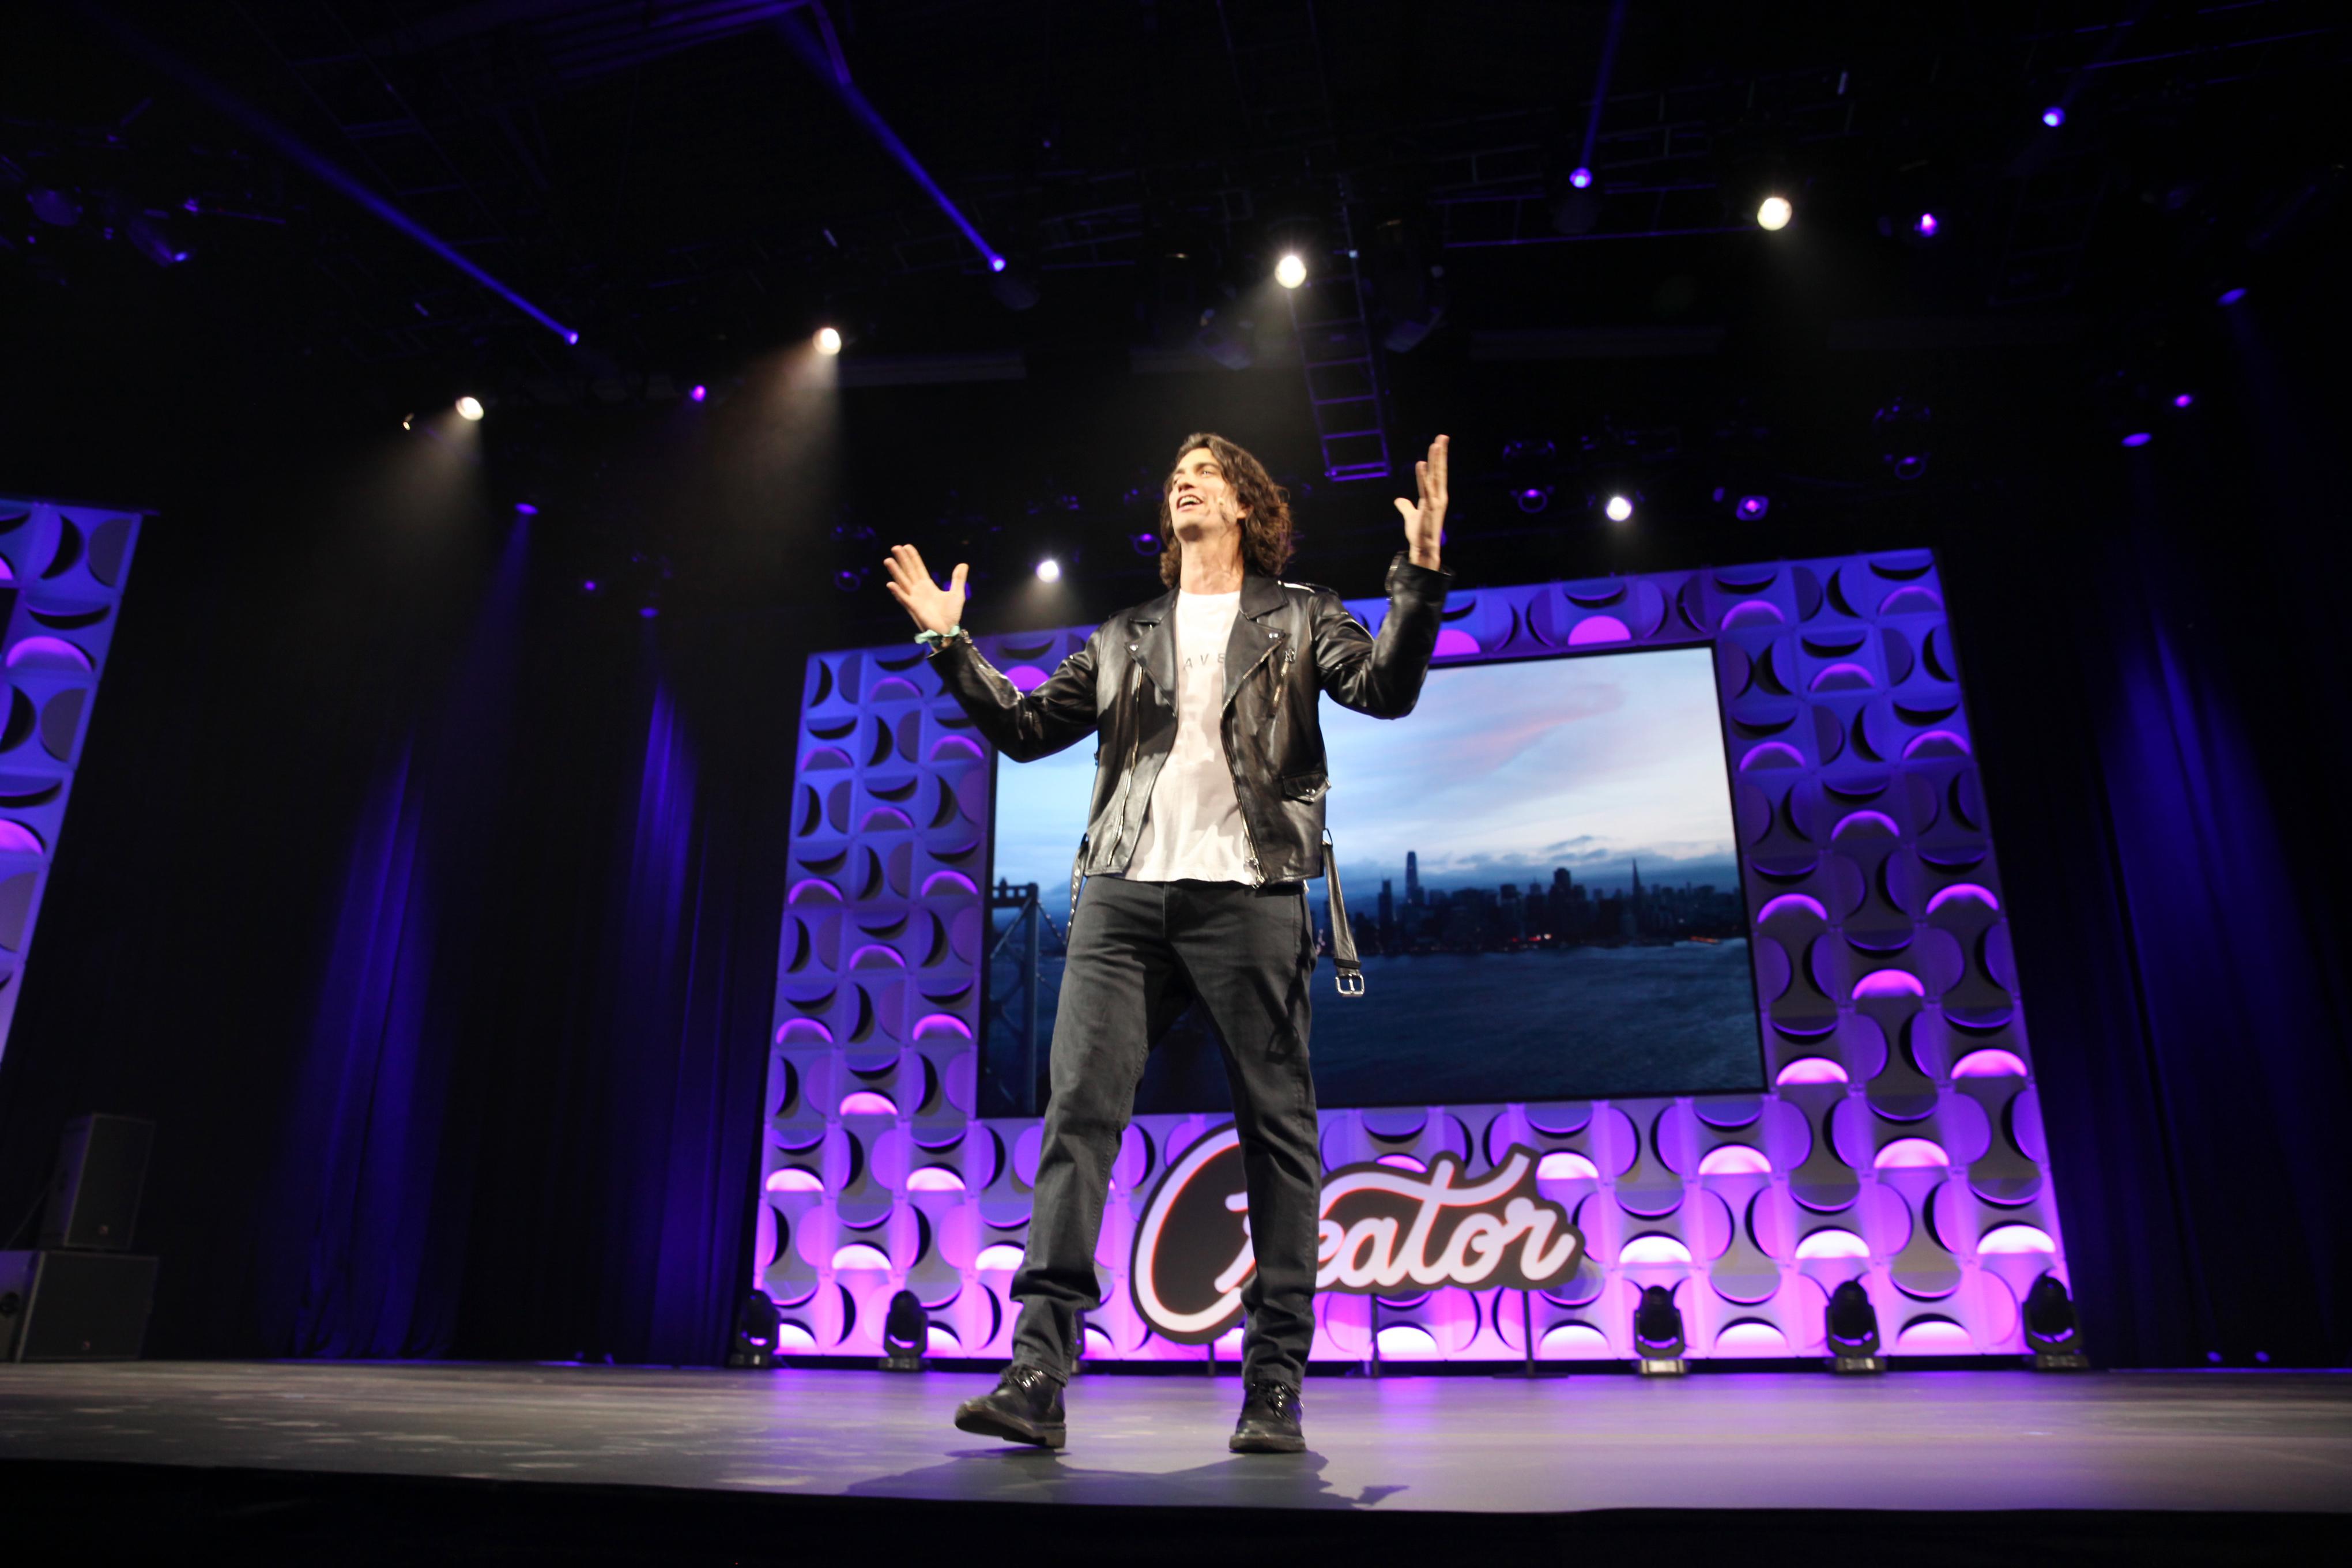 Adam Neumann is on stage wearing a leather jacket and sneakers